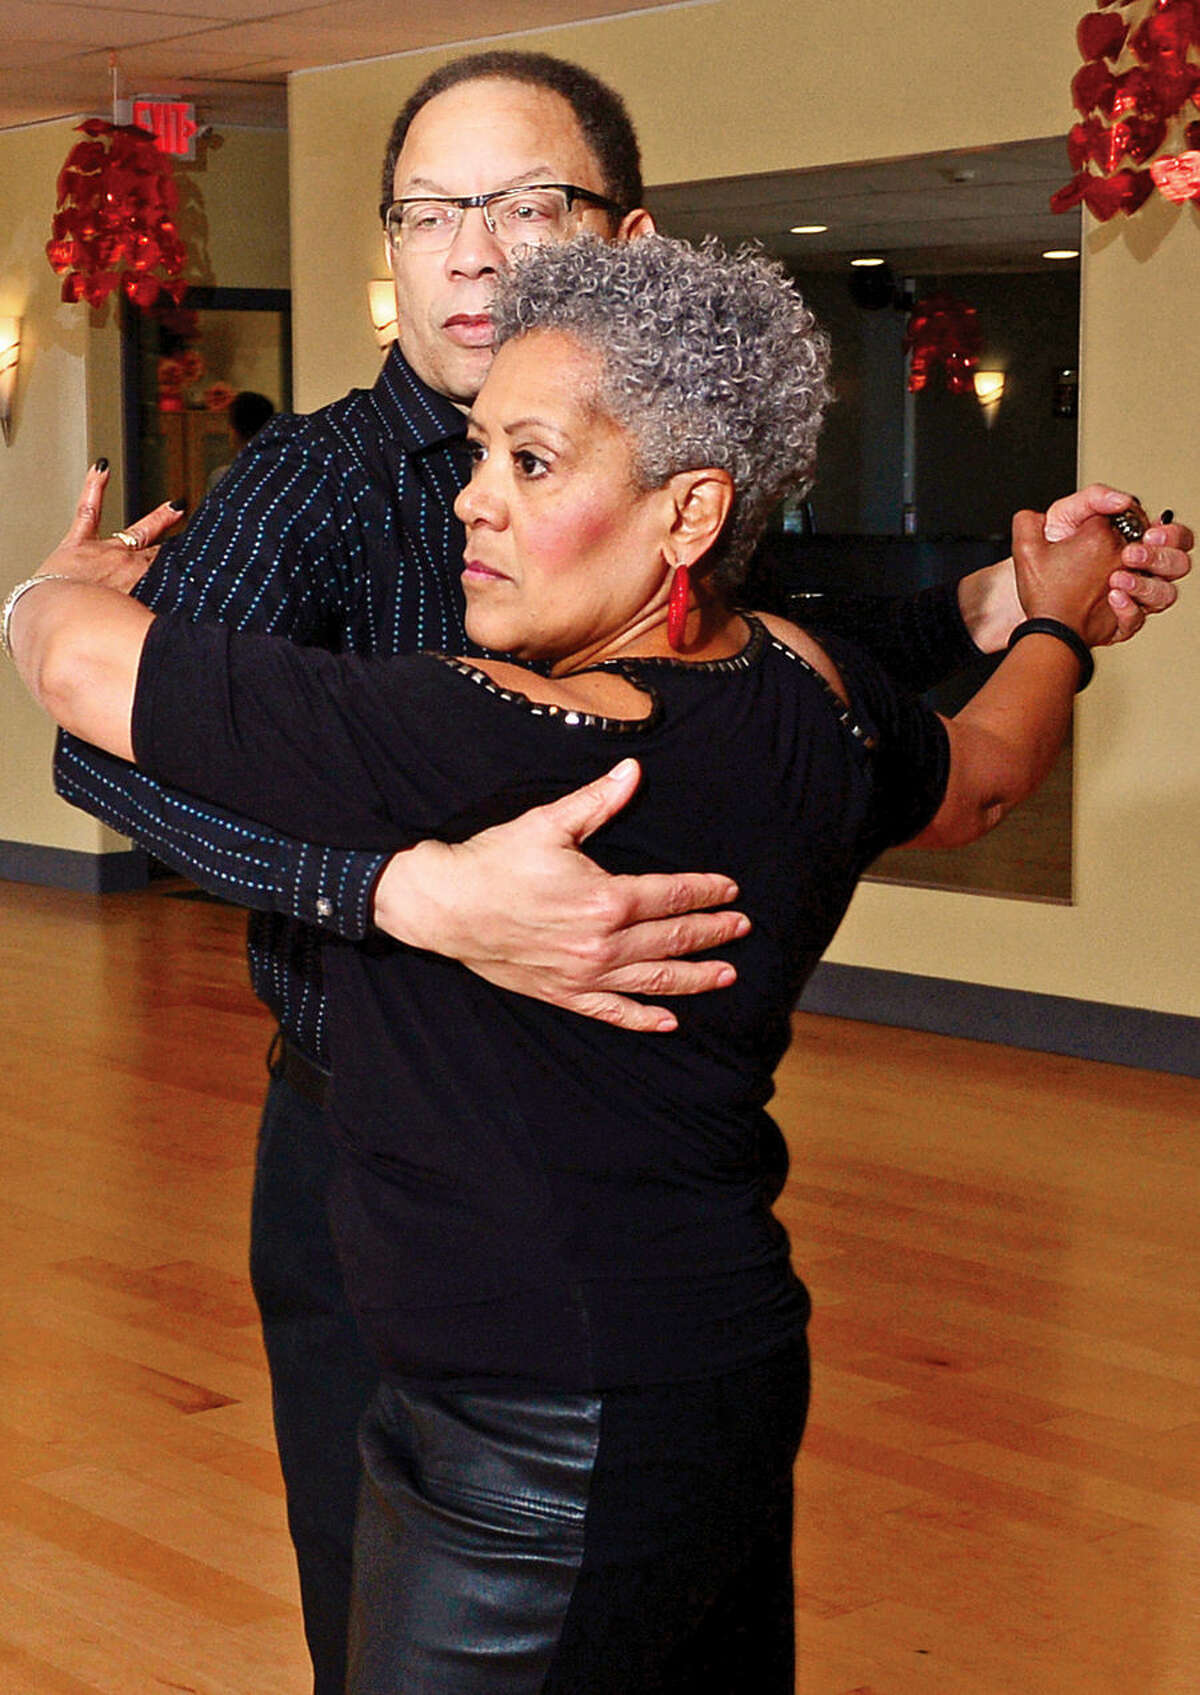 Hour photo / Erik Trautmann Norwalk residents Chuck and Cheryl Presbury have been married for 30 years and ballroom dancing at Fred Astaire Dance Studio in Norwalk for the last five.